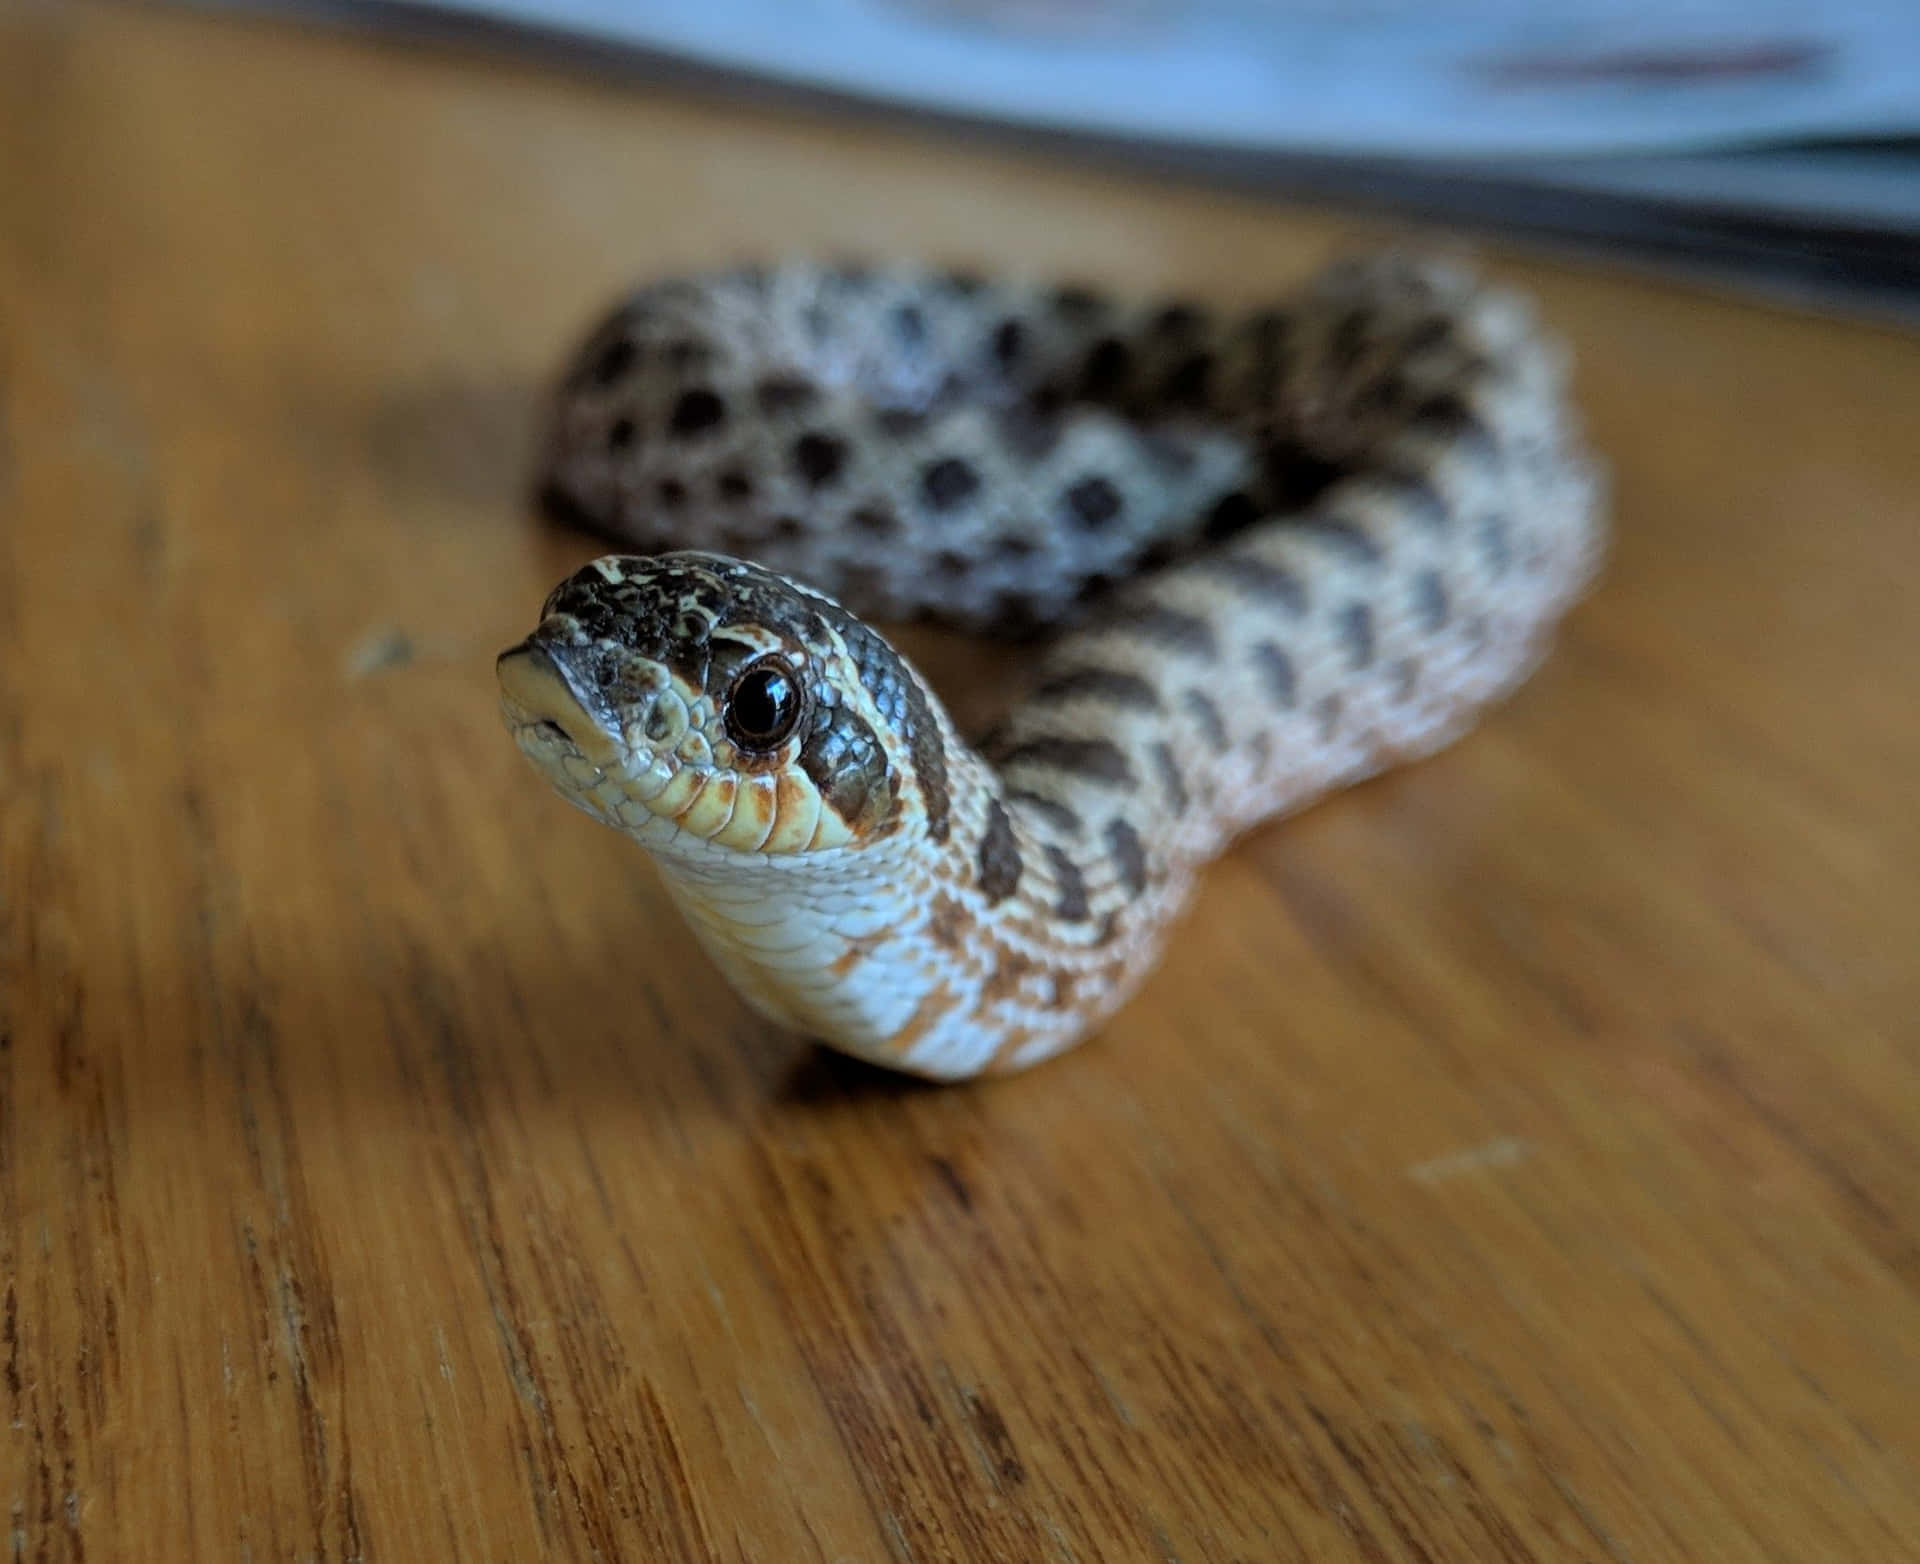 Cute Snake Crawling On Wooden Floor Picture